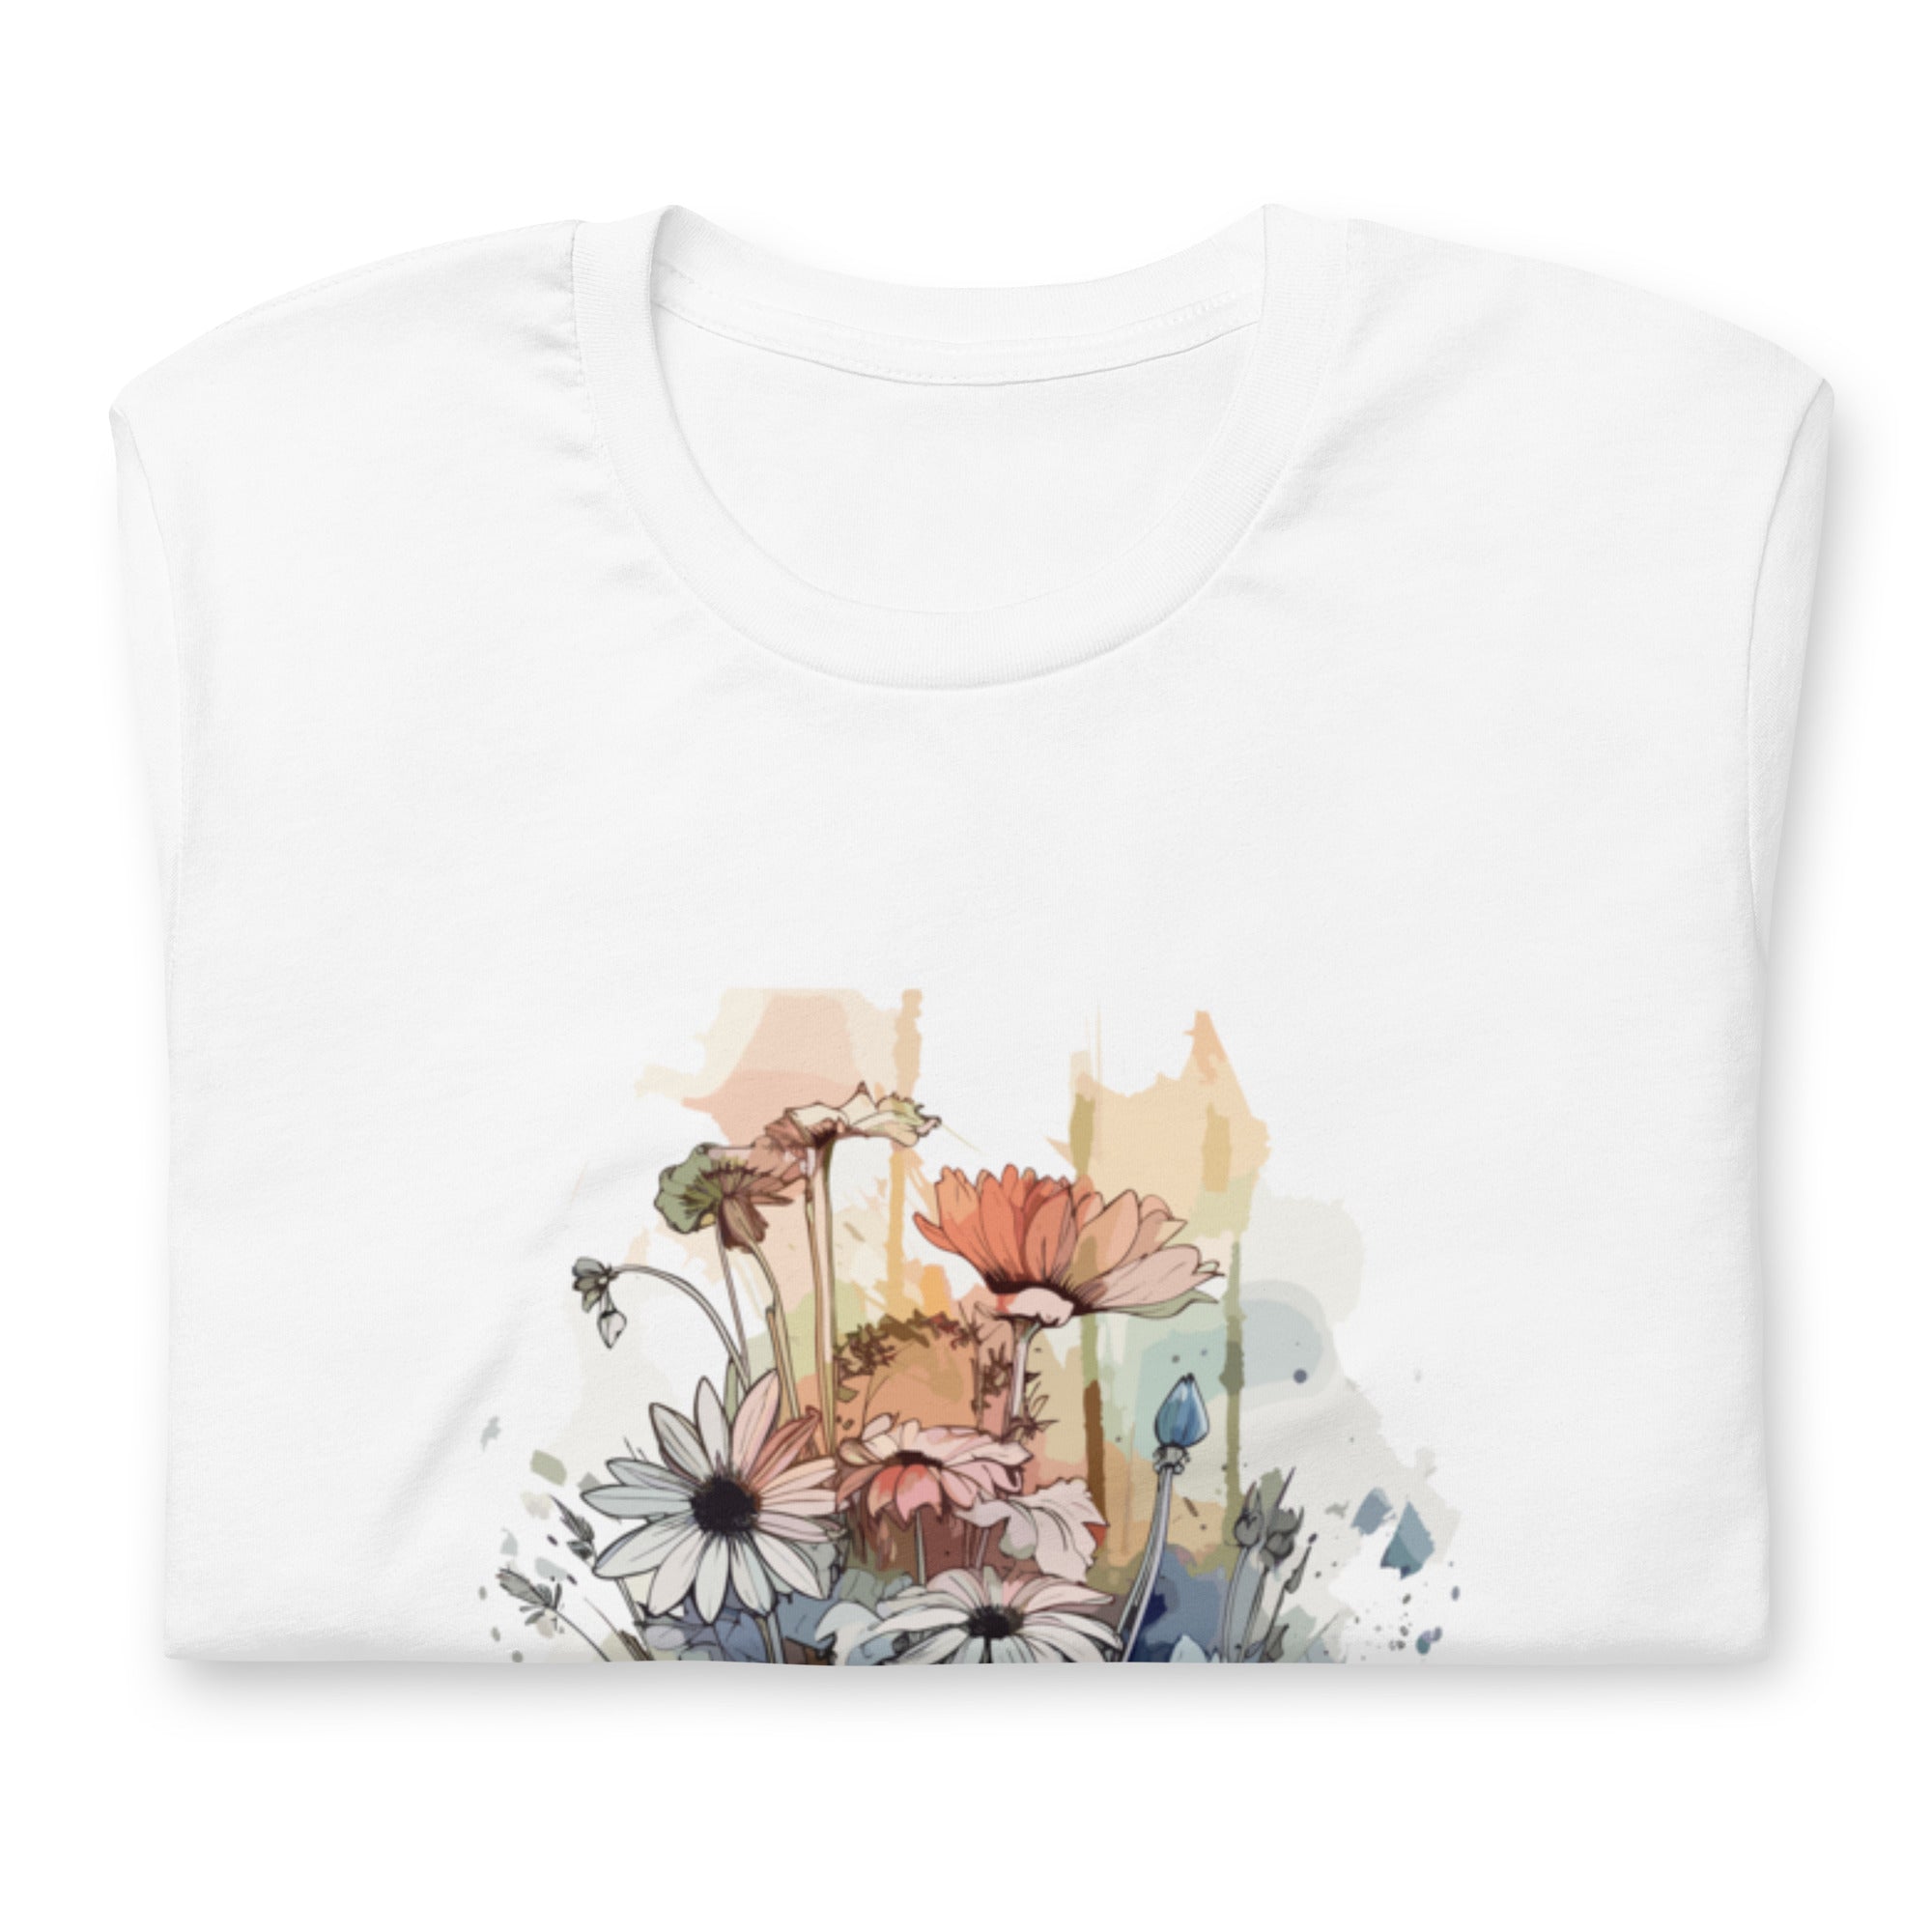 Dreamy Watercolor Wild Flowers Graphic Unisex t-shirt